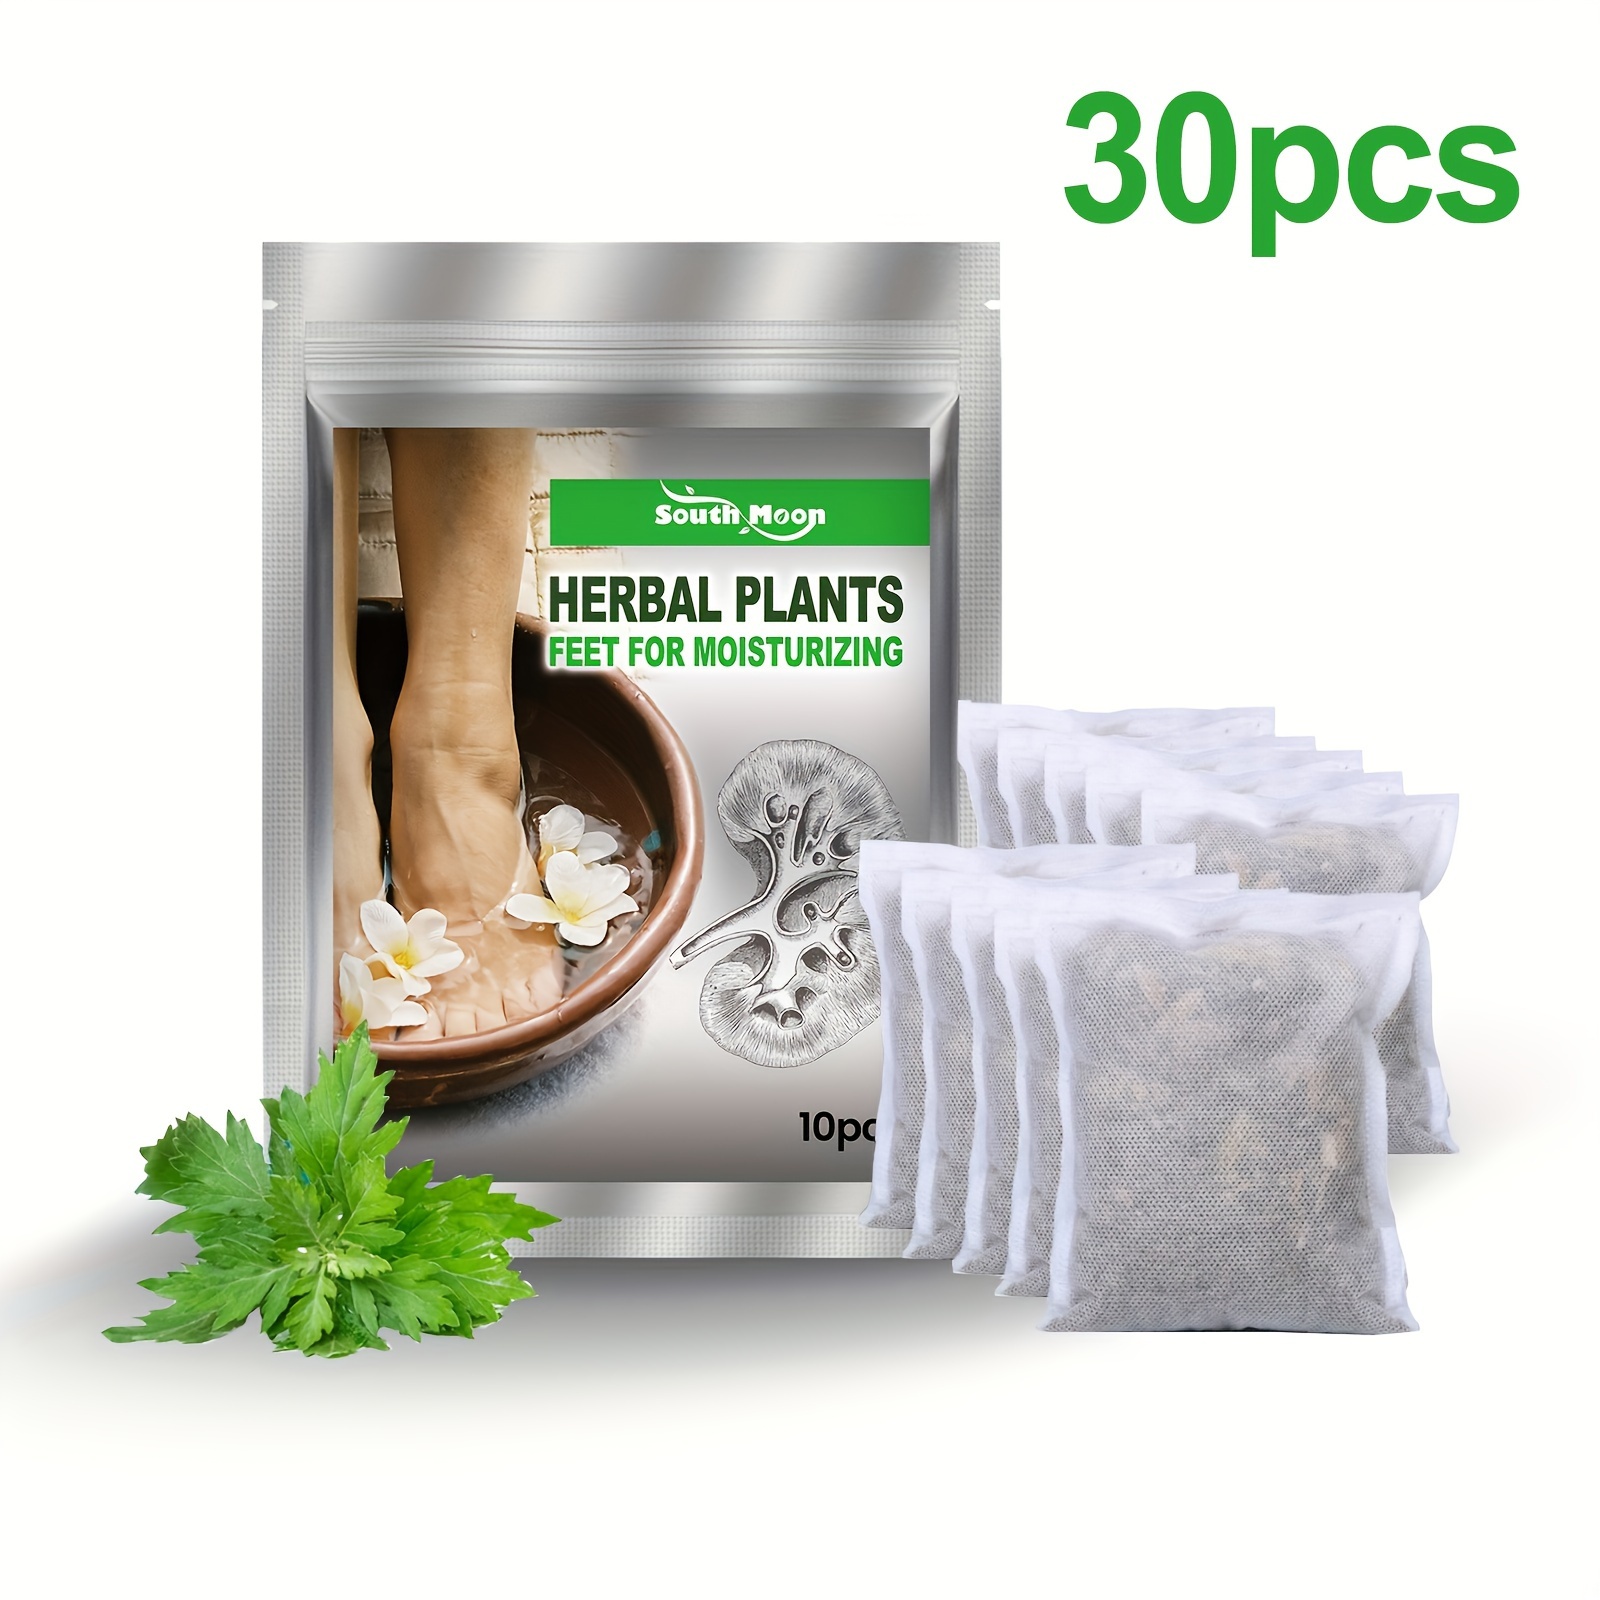 

30pcs Pure Cleansing Herbal Foot Soak, Ginger Foot Soak, Ginger Foot Bath Bag, Moisture Foot Bath Spa, Present For Parents